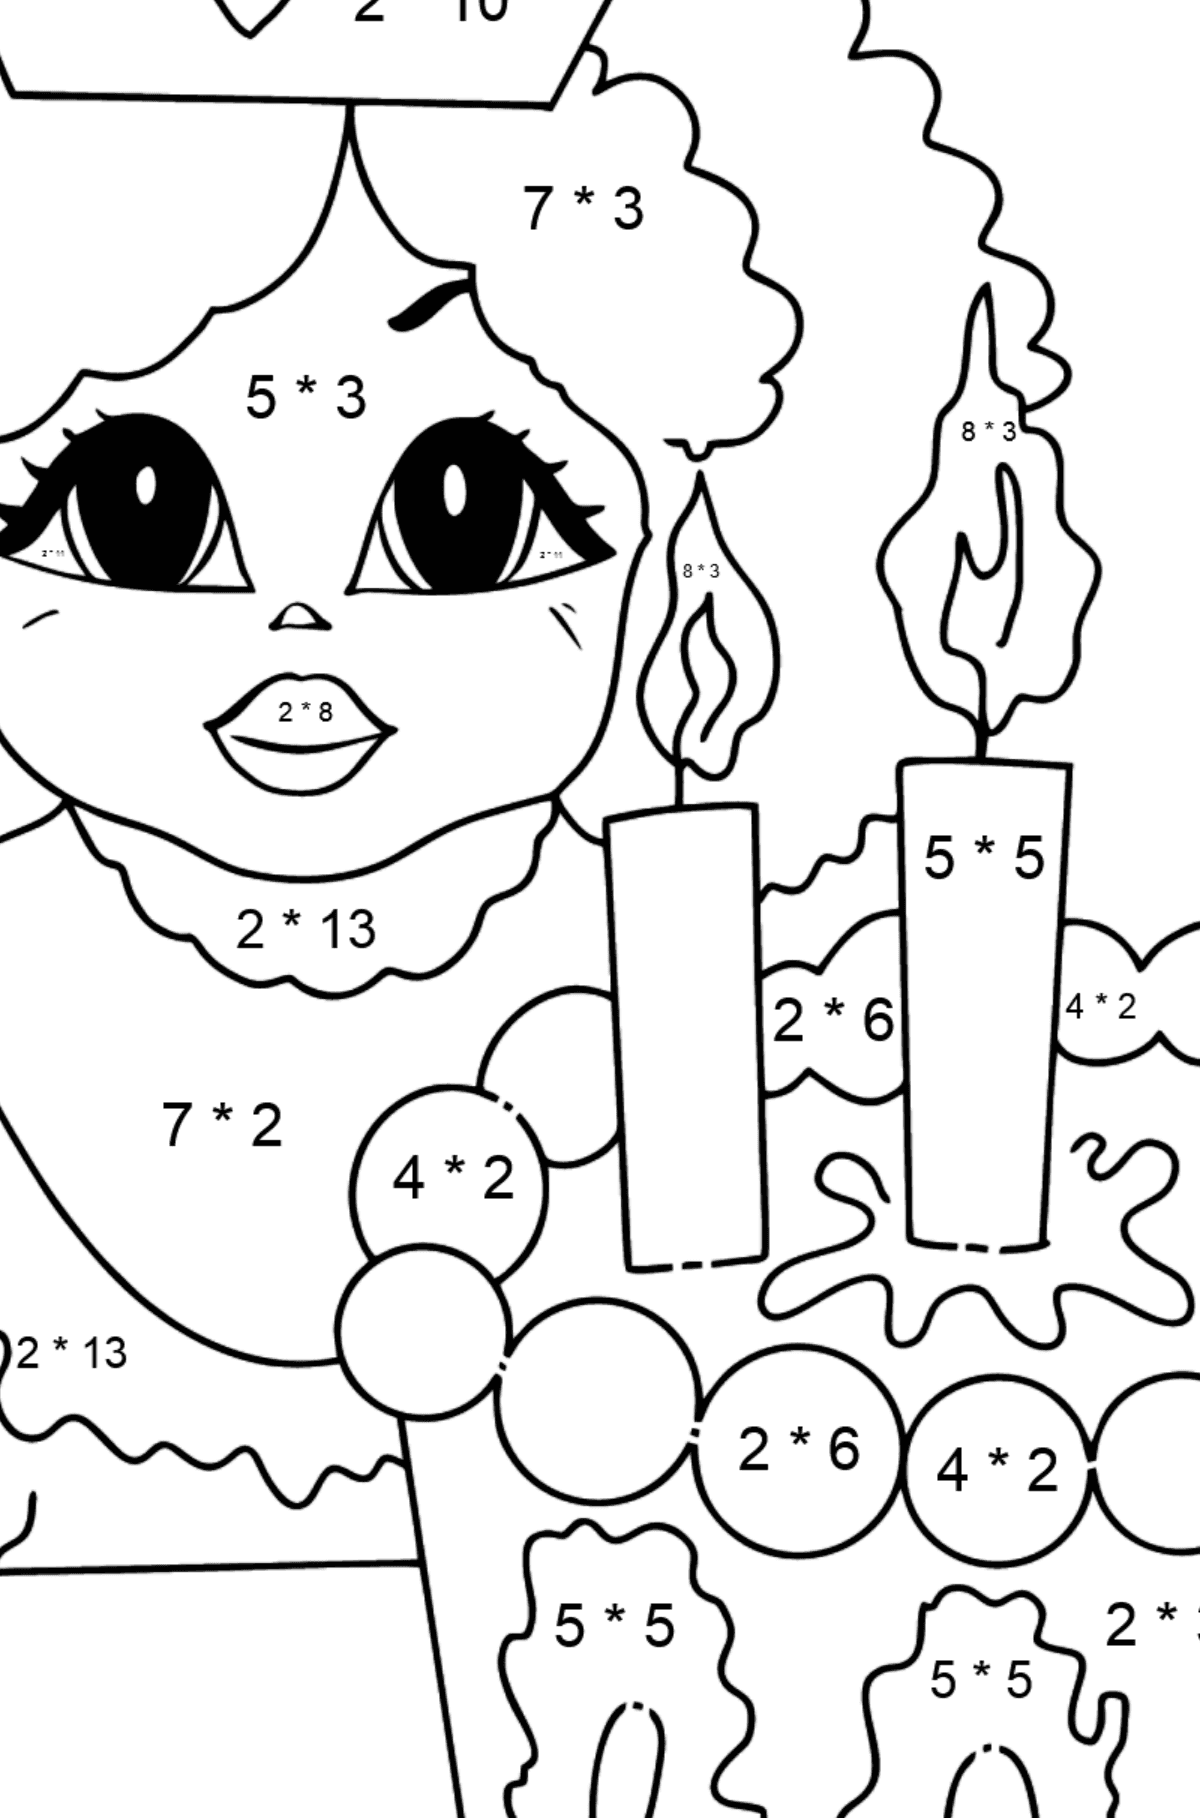 Coloring Picture - A Princess with Cake - Math Coloring - Multiplication for Kids